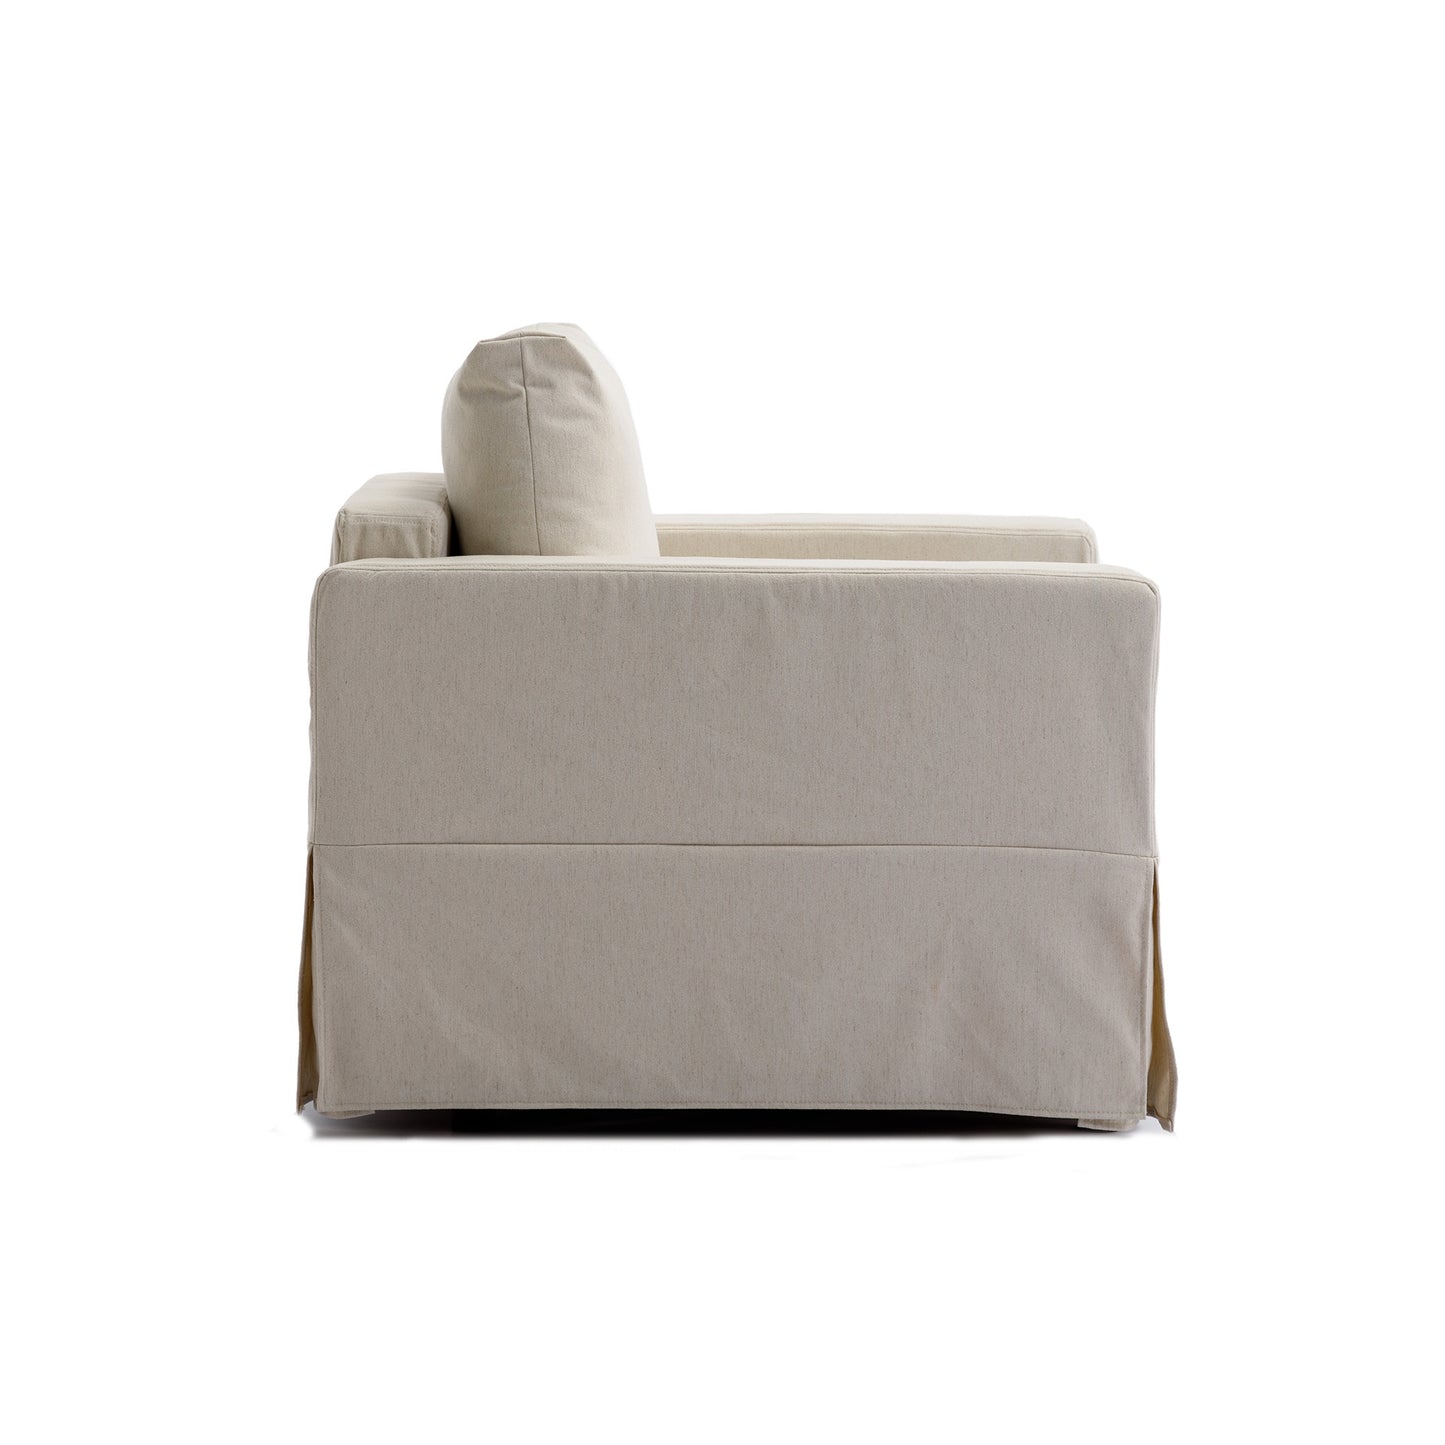 Single Seat Module Sofa Sectional Couch Seat Cushion and Back Cushion Removable and Washable,Cream